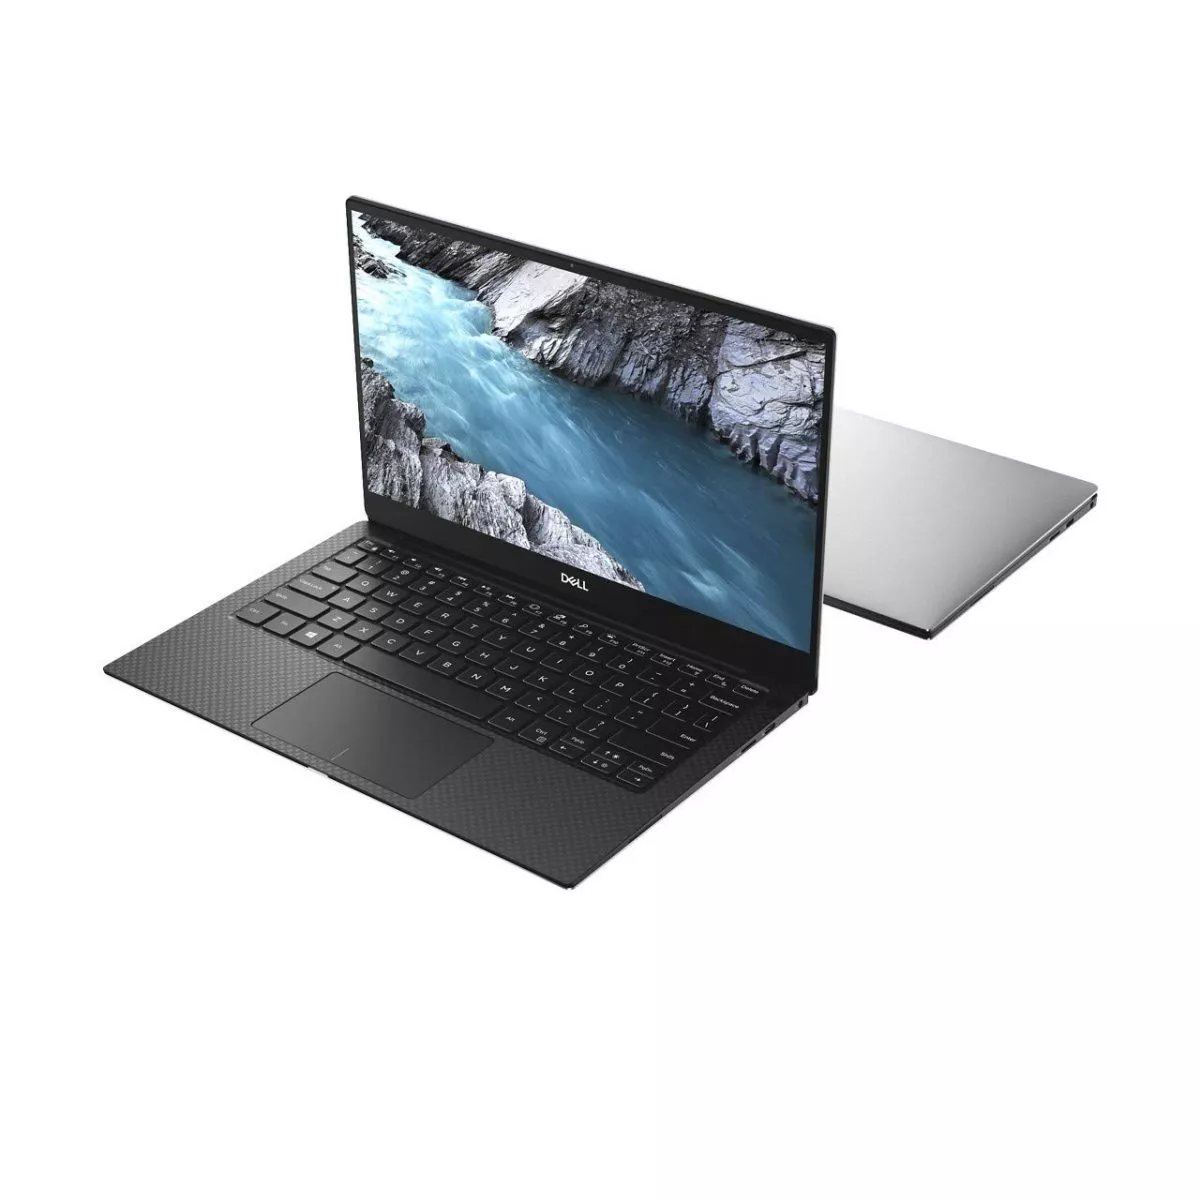 DELL XPS 13 7390 2-in-1 Platinum Silver, 13.3" UHD WLED Touch (Intel® Core™ i7-1065G7, 16GB 3733MHz фото